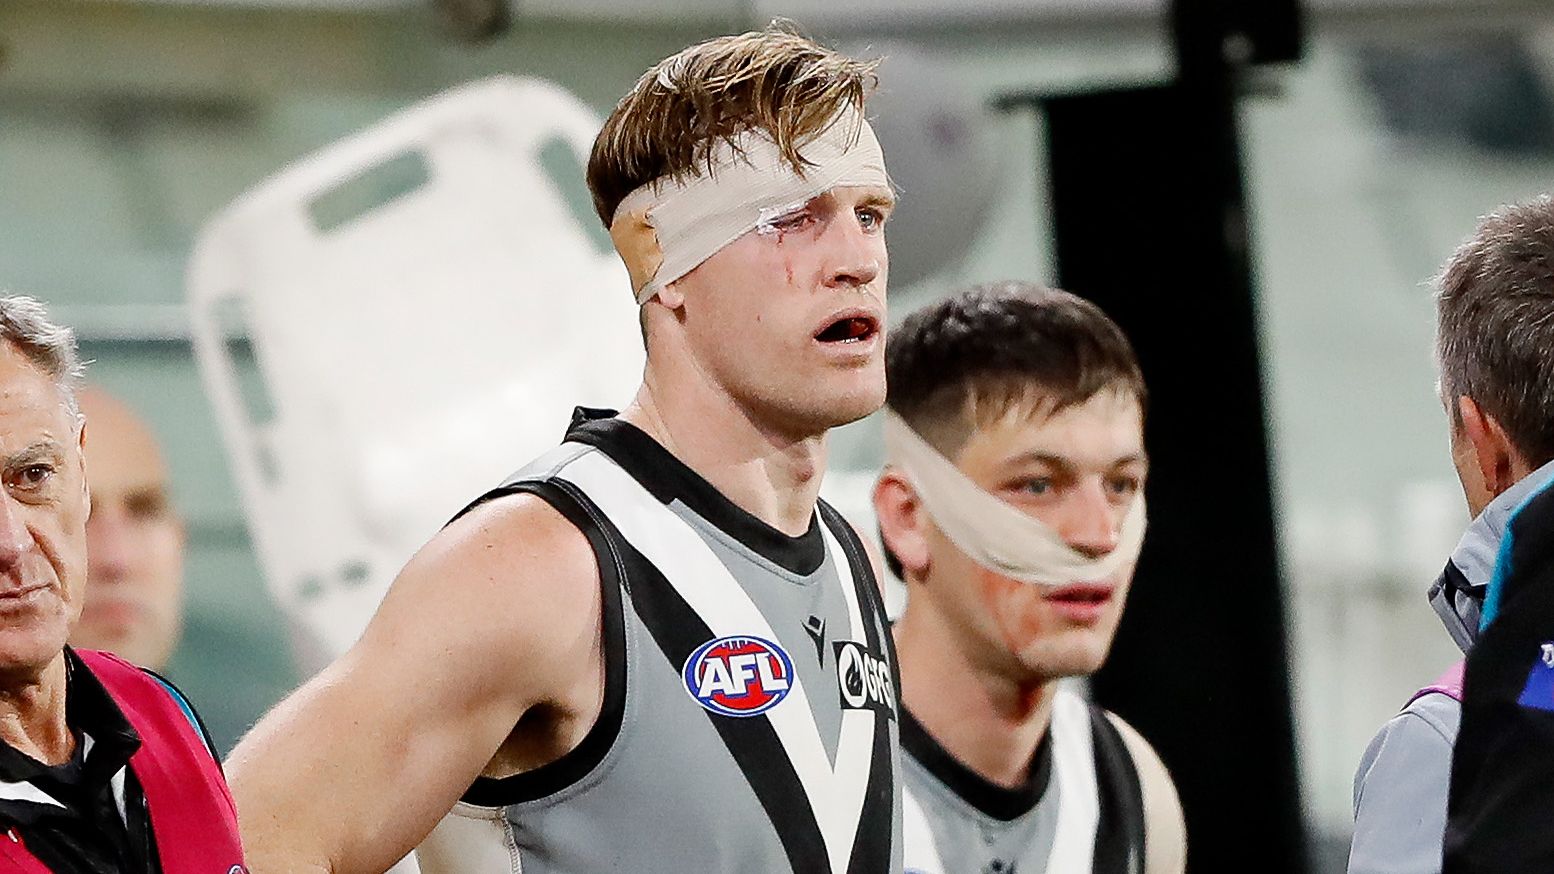 Ken Hinkley supports doctor's concussion verdict after sickening clash